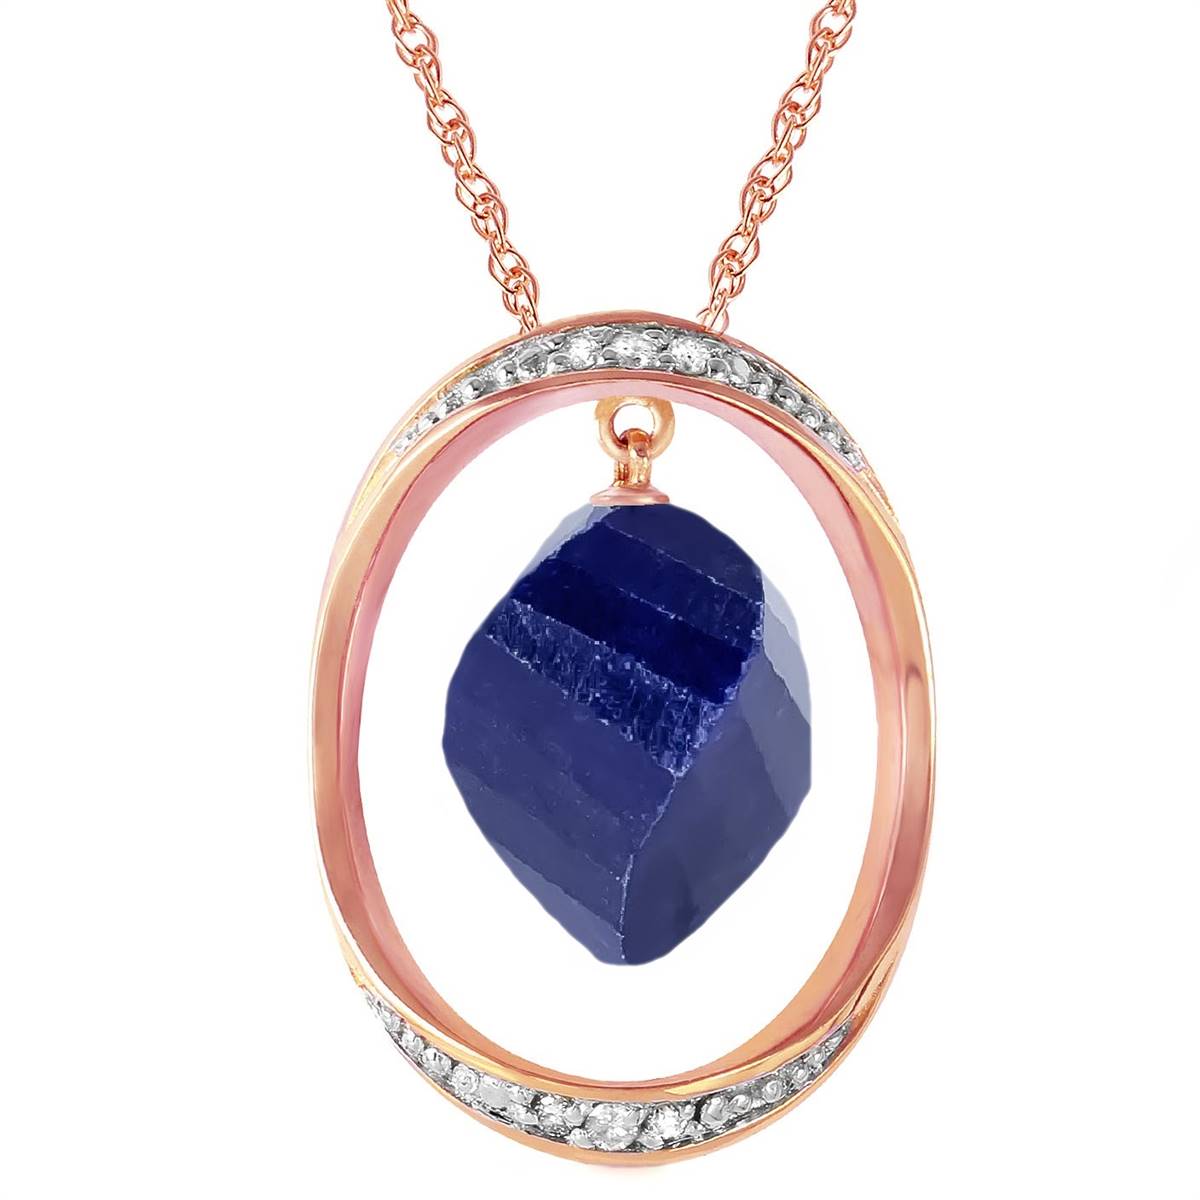 14K Solid Rose Gold Necklace w/ Twisted Briolette Dyed Sapphire & Diamonds